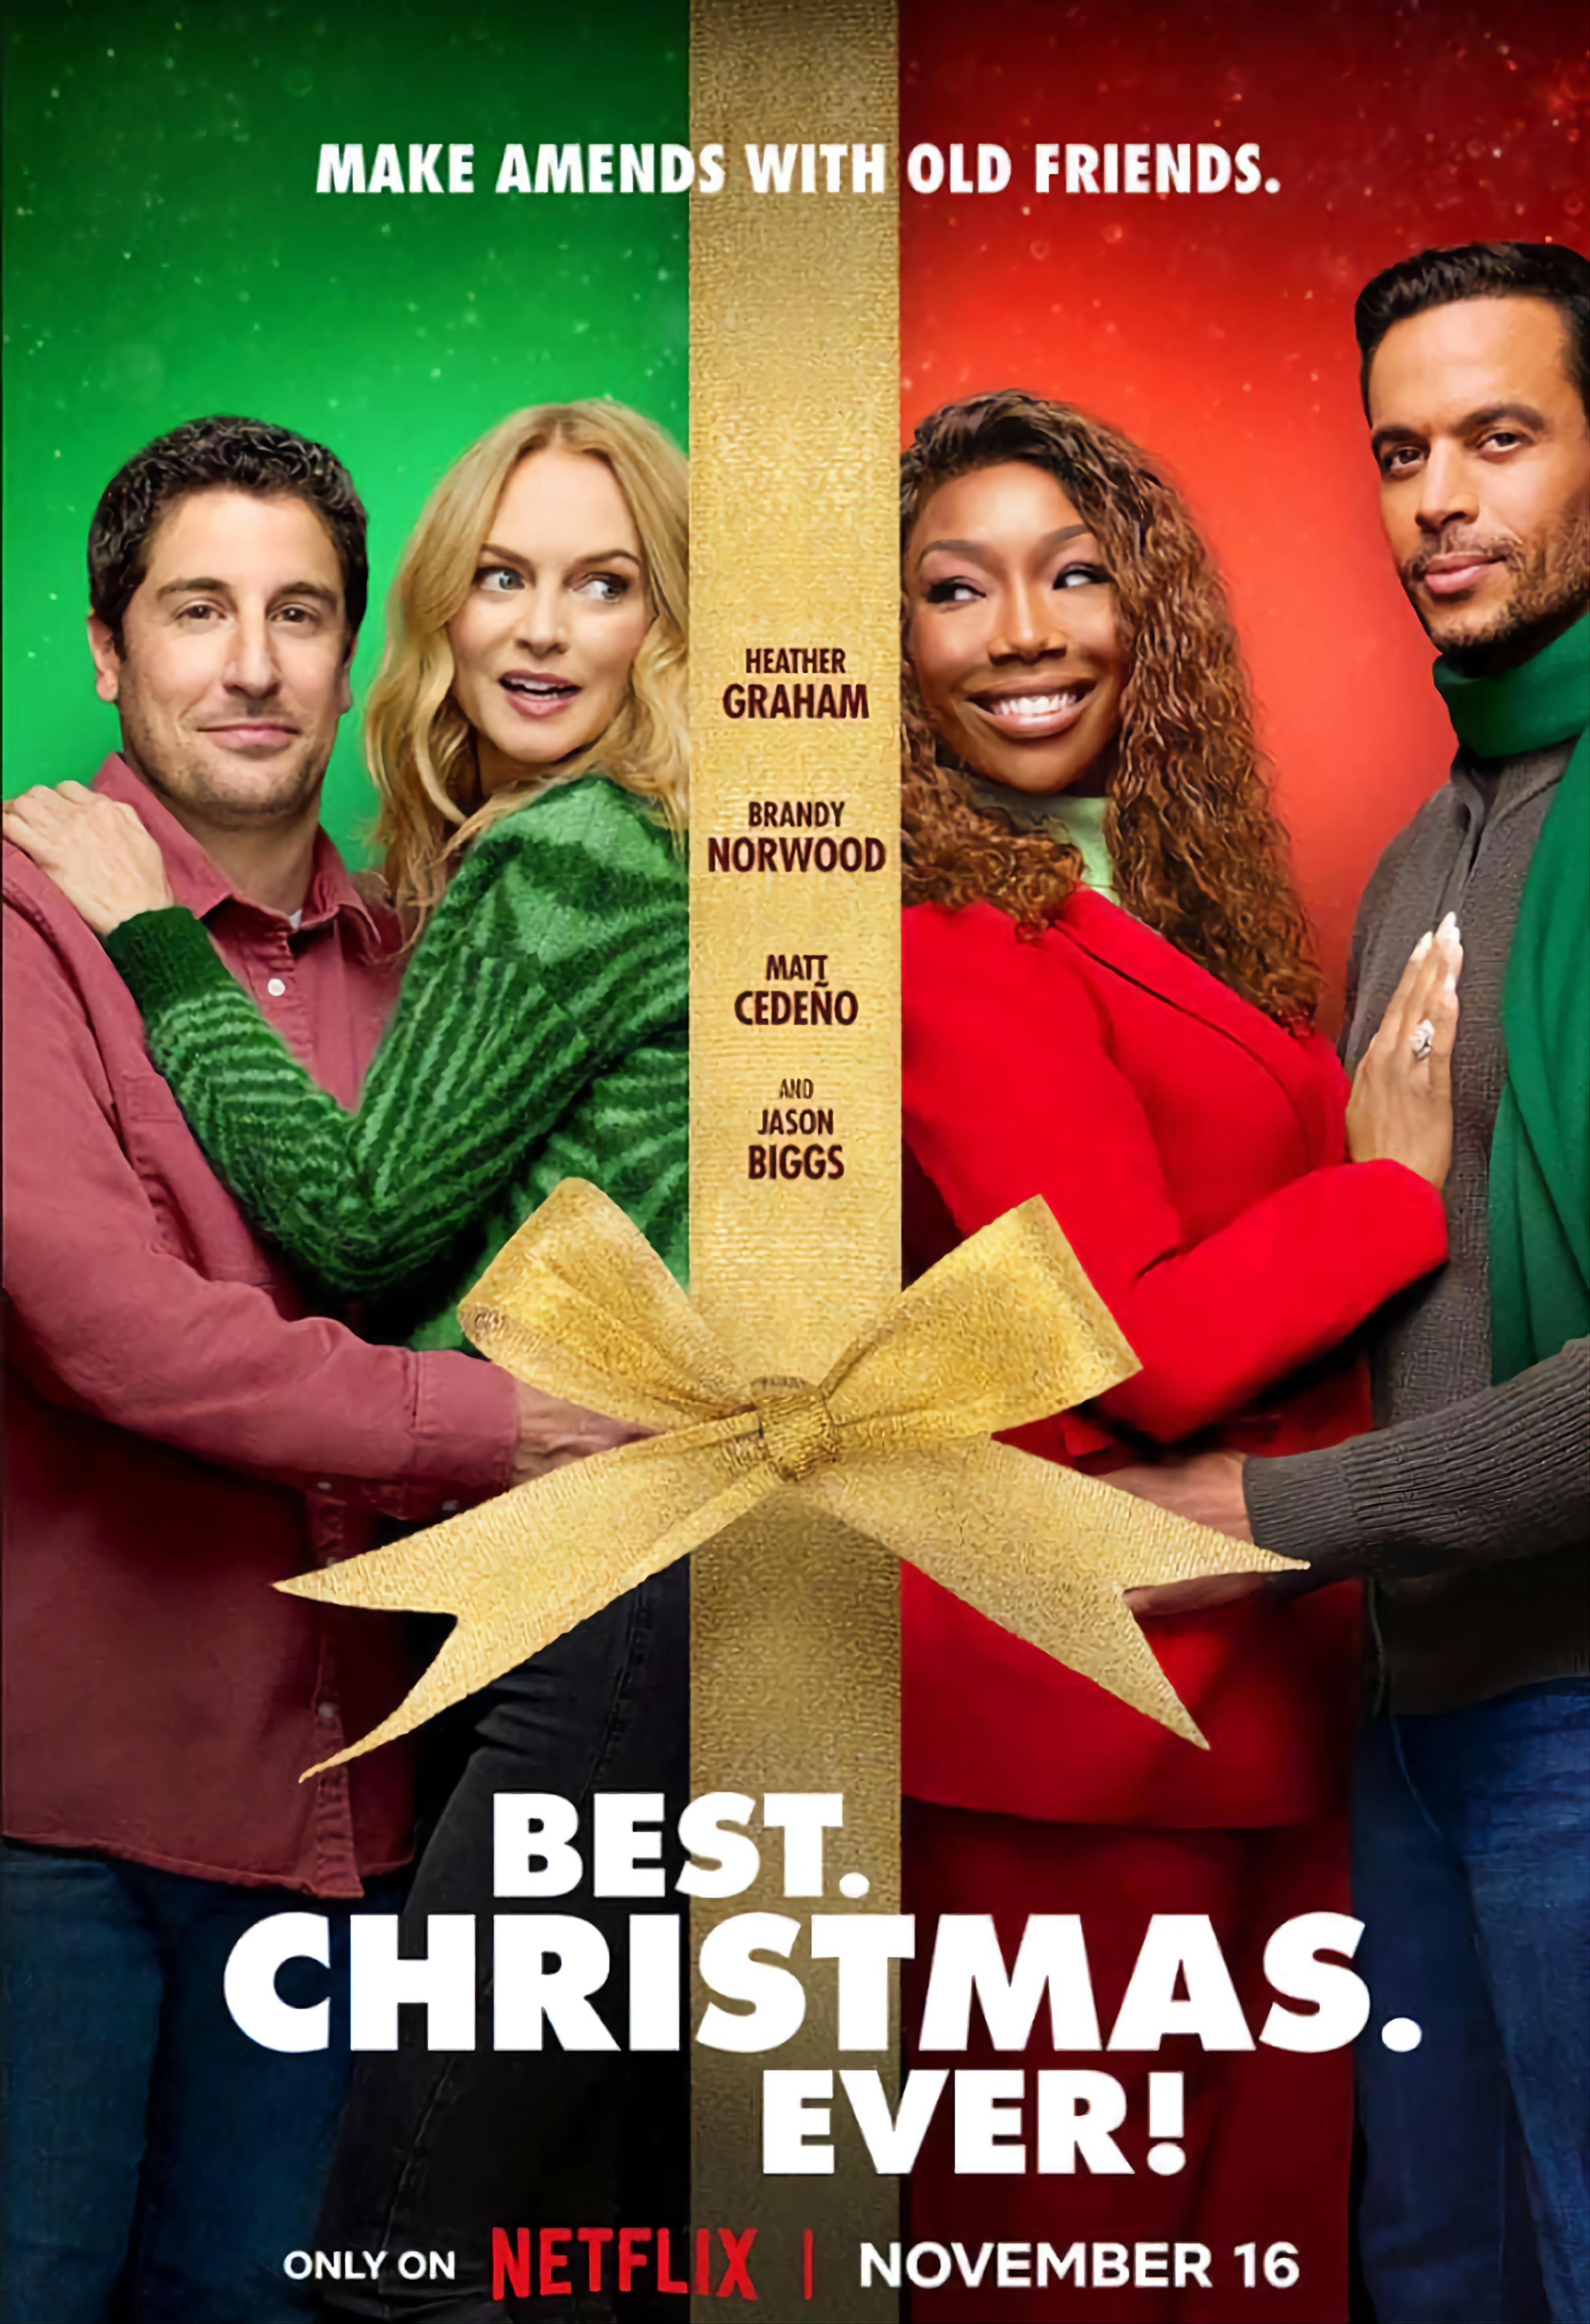 'Best. Christmas. Ever!' — Trailer, Cast, and Everything We Know So Far